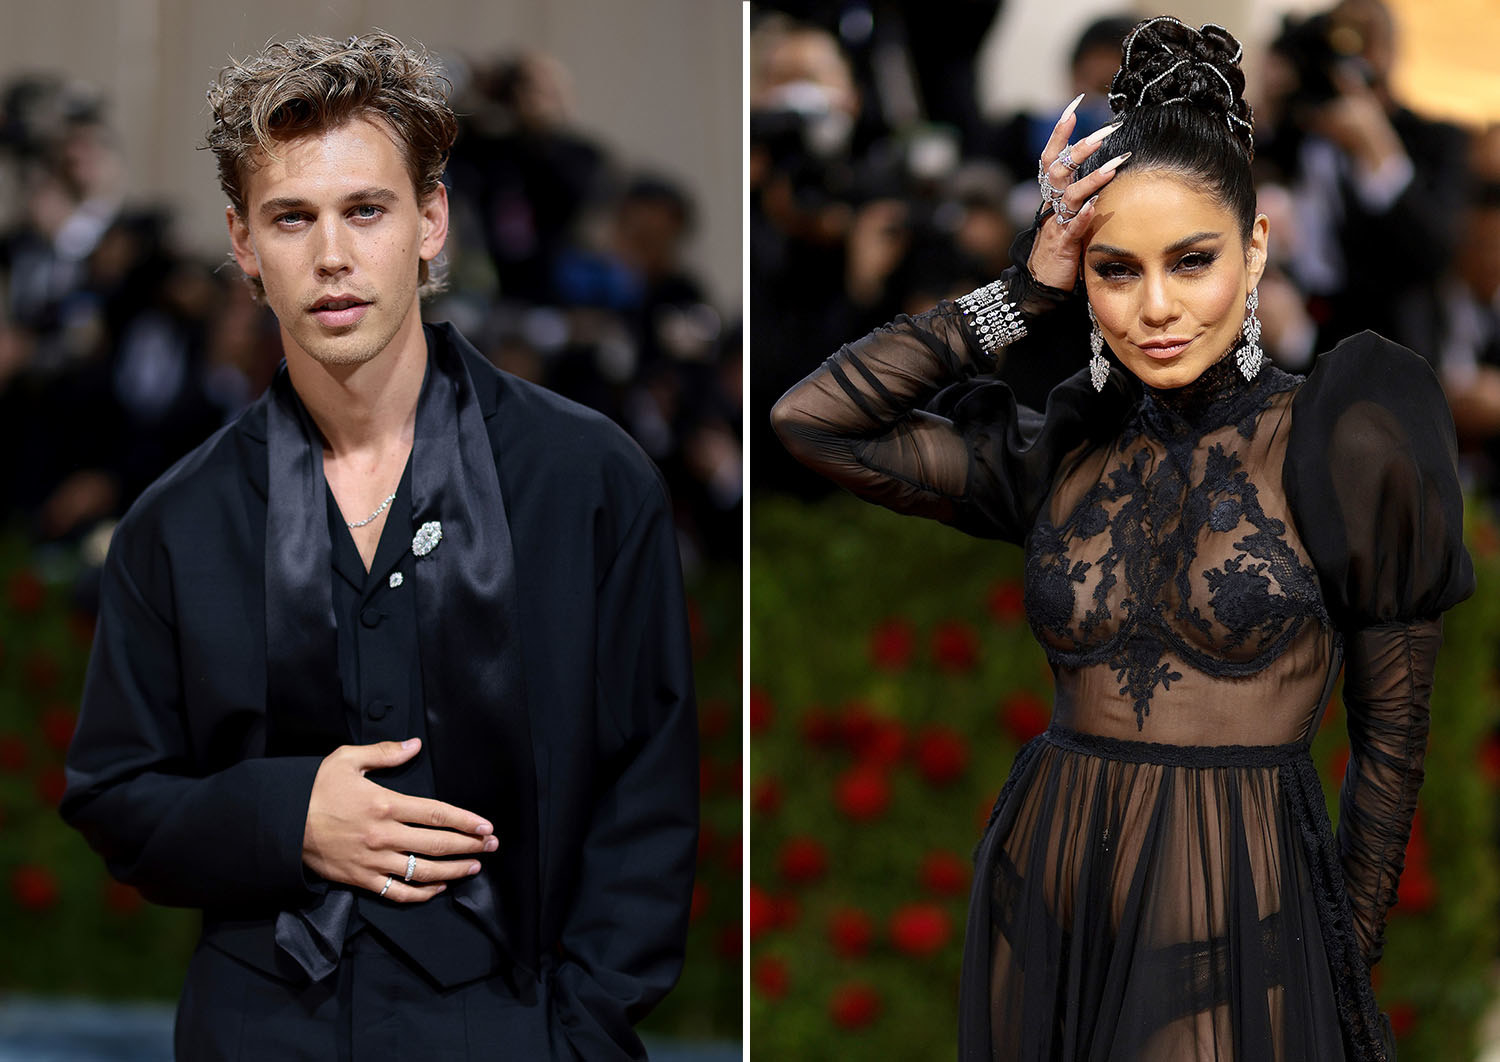 Austin Butler poses in a suit; Vanessa Hudgens smiles and poses in a see-through dress